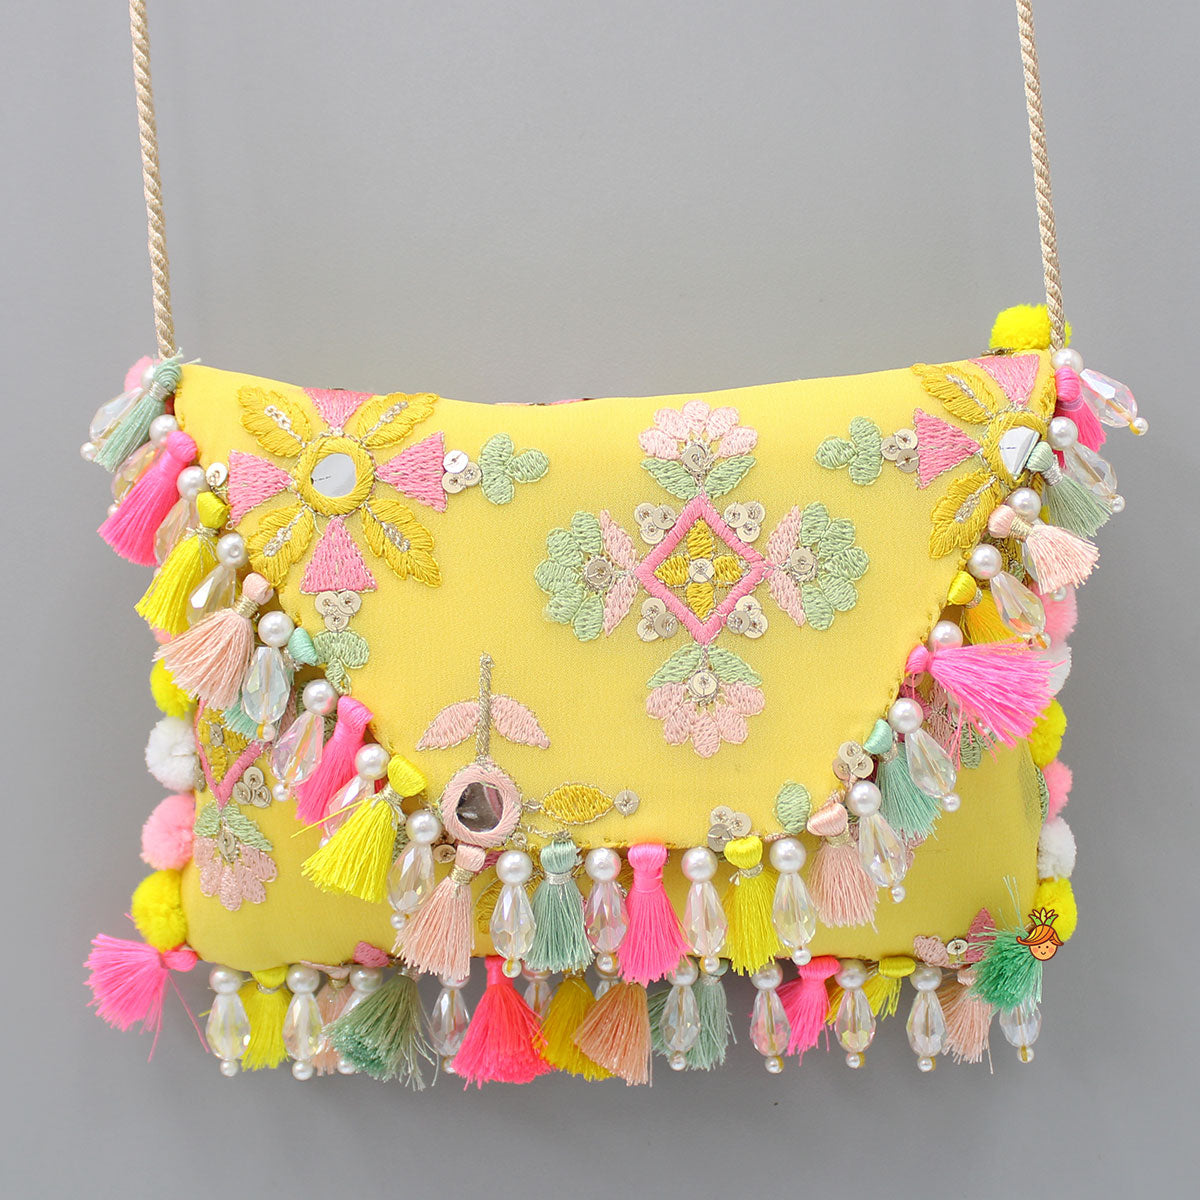 Thread Embroidered Yellow Rope Sling Bag